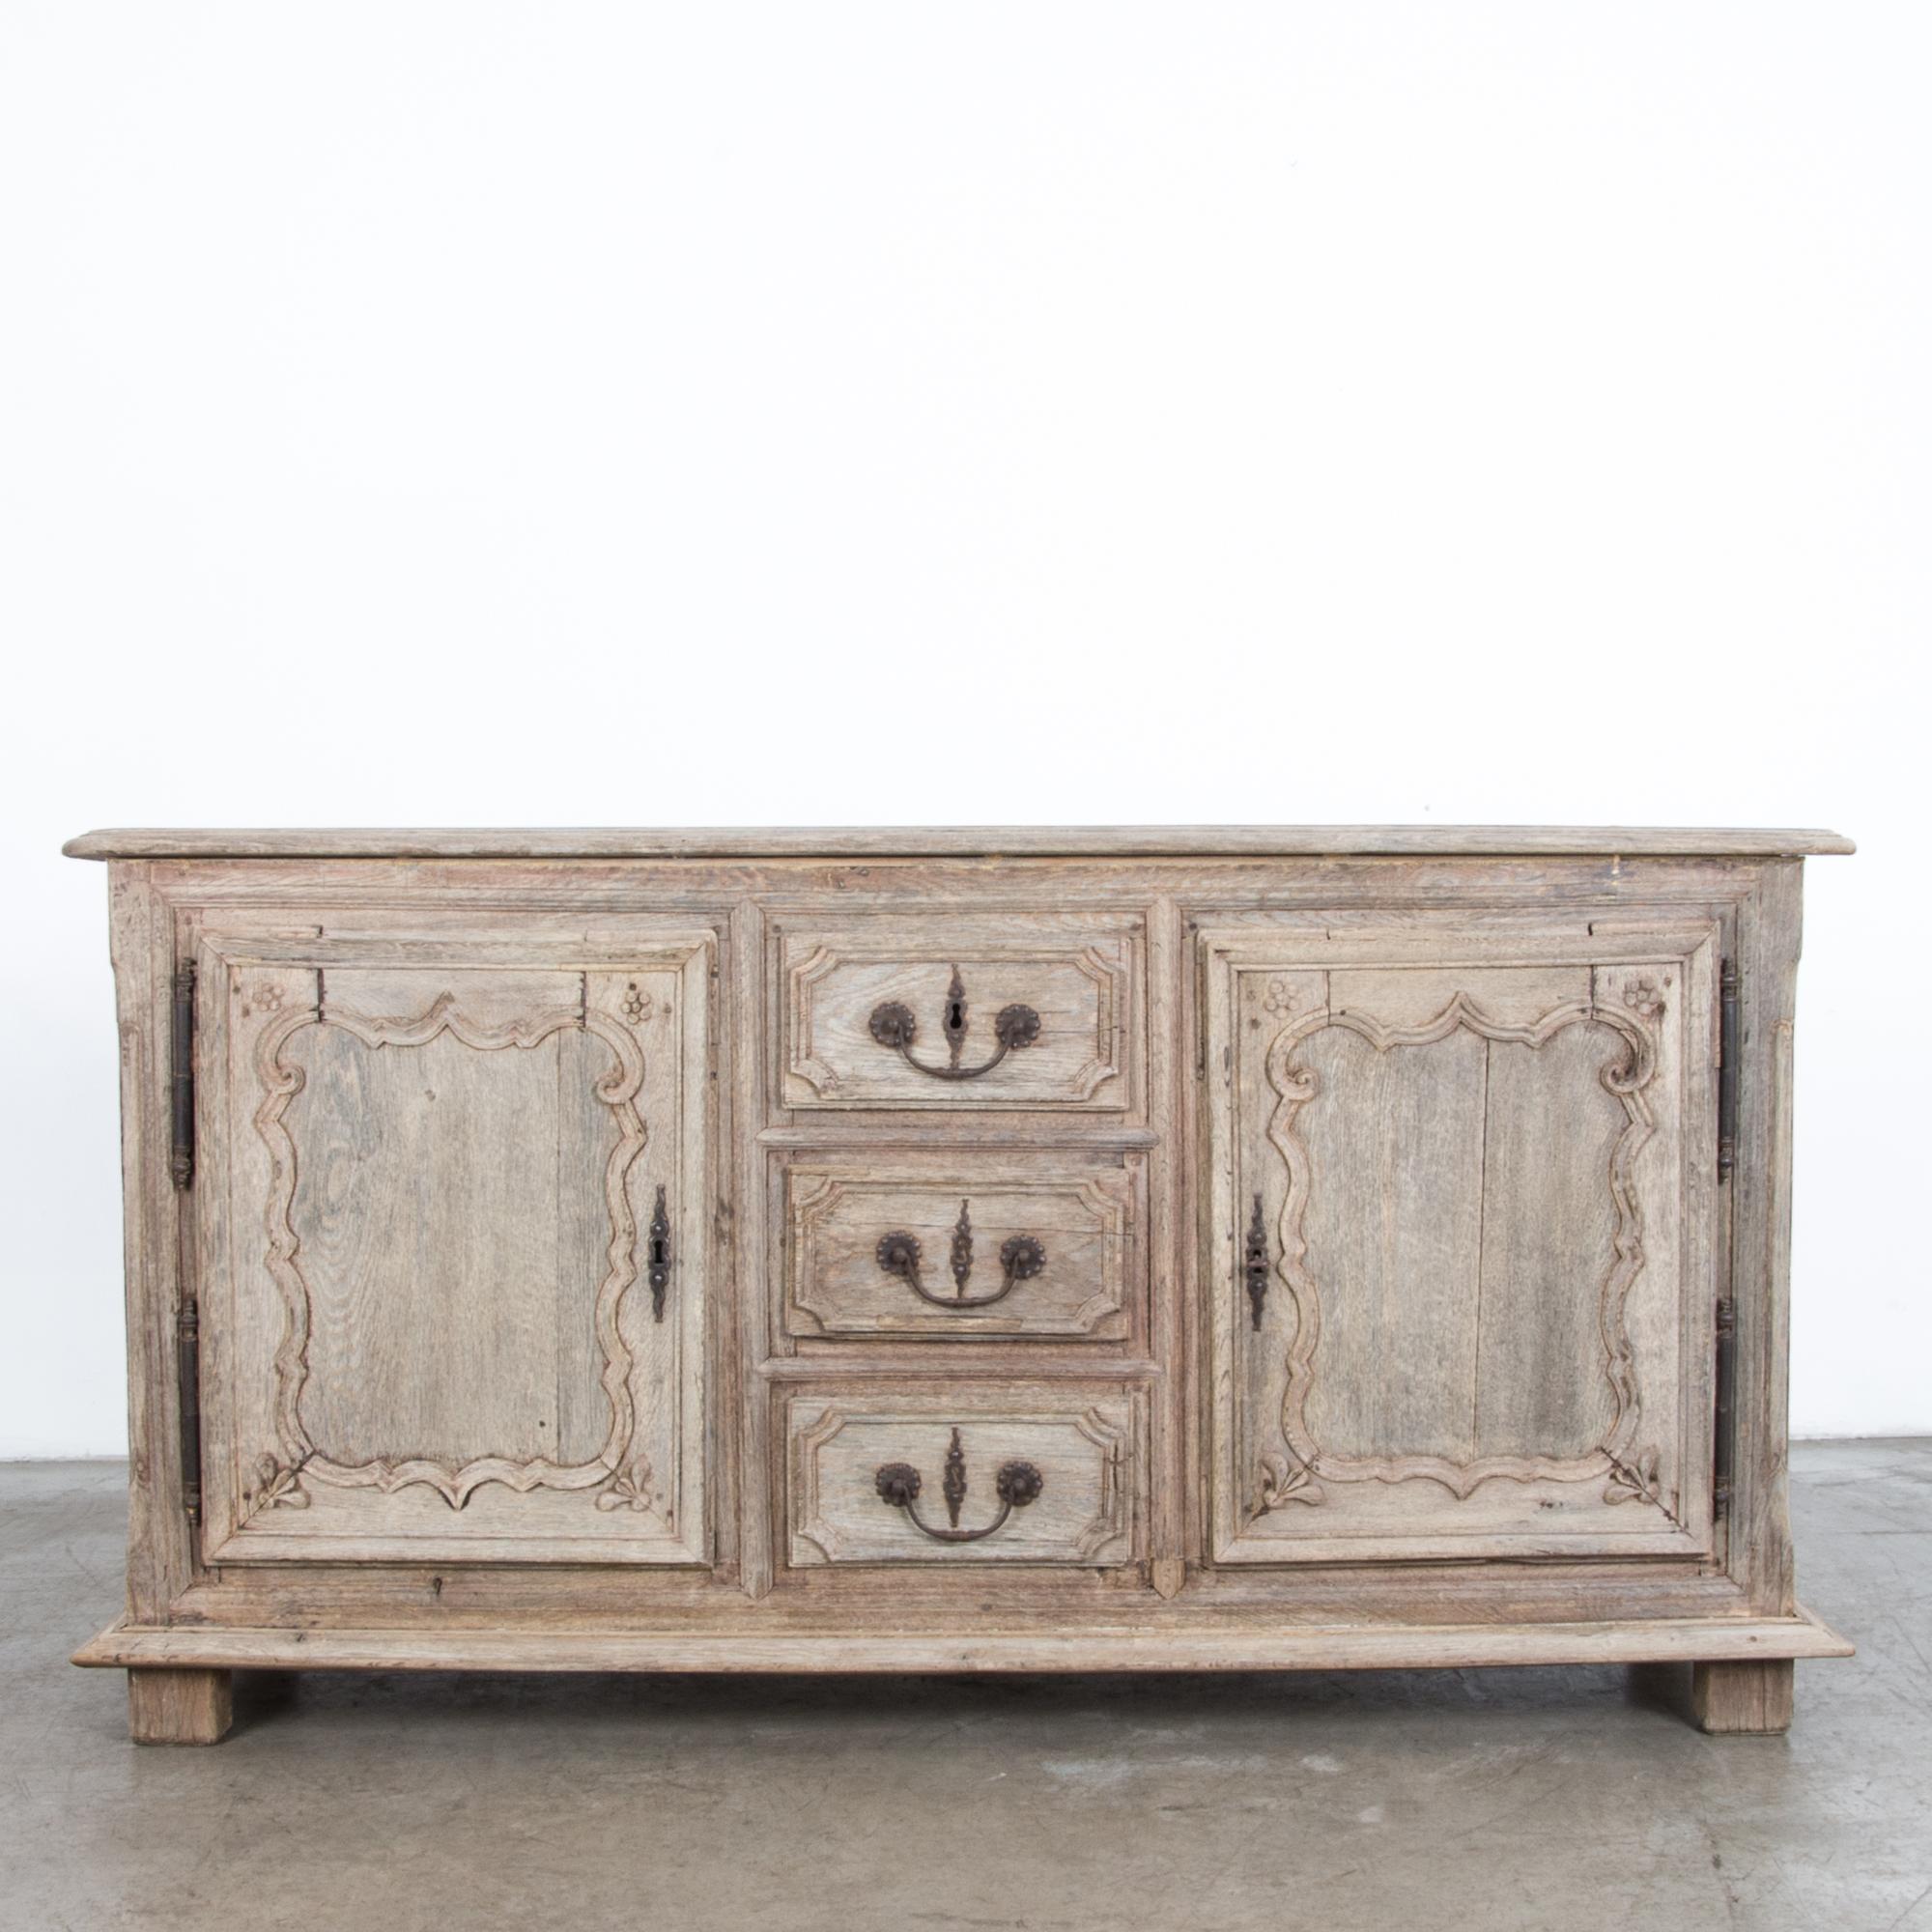 From France, circa 1800, a two-door oak sideboard with three center drawers. In a stylish light finish, sturdy oak has been cleaned and polished with an oil & wax finish, enhancing the natural wood texture and original iron hardware. Chic while